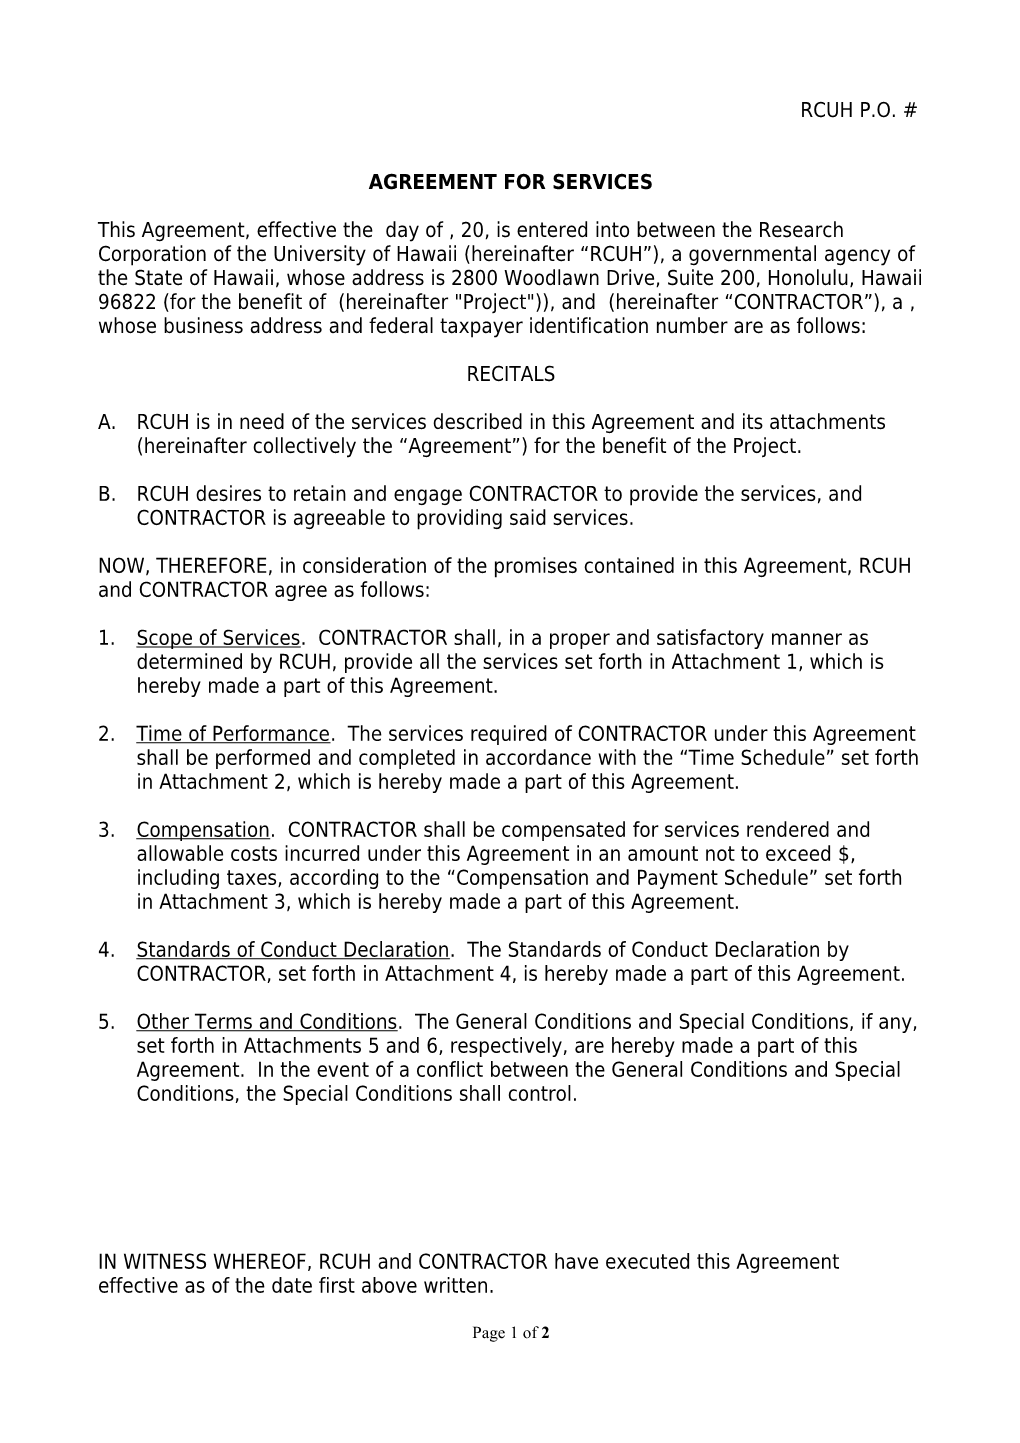 Agreement for Services s1